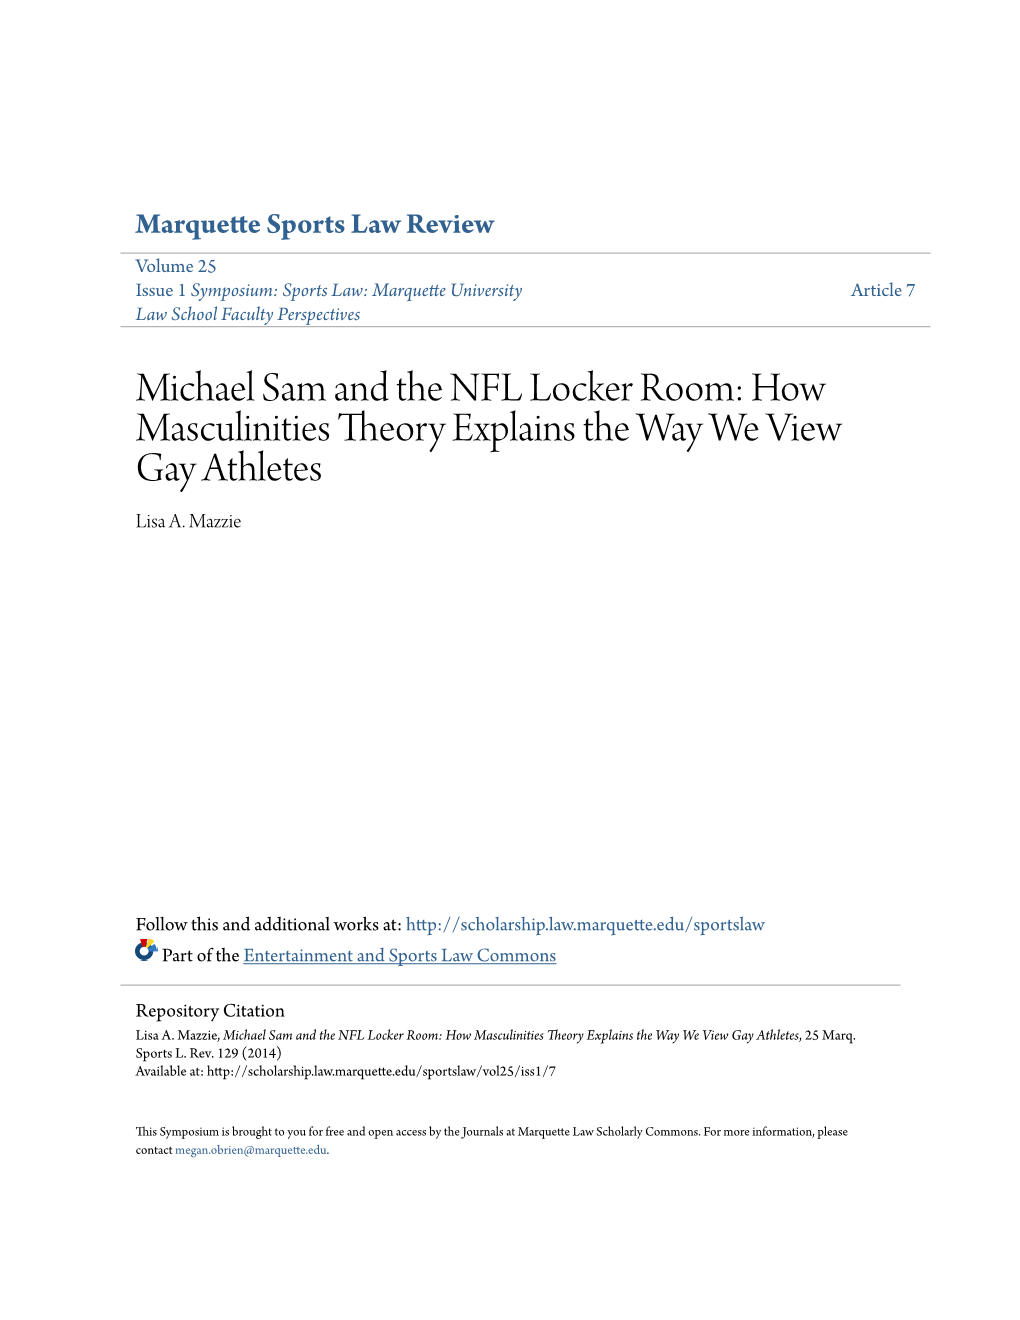 Michael Sam and the NFL Locker Room: How Masculinities Theory Explains the Way We View Gay Athletes Lisa A